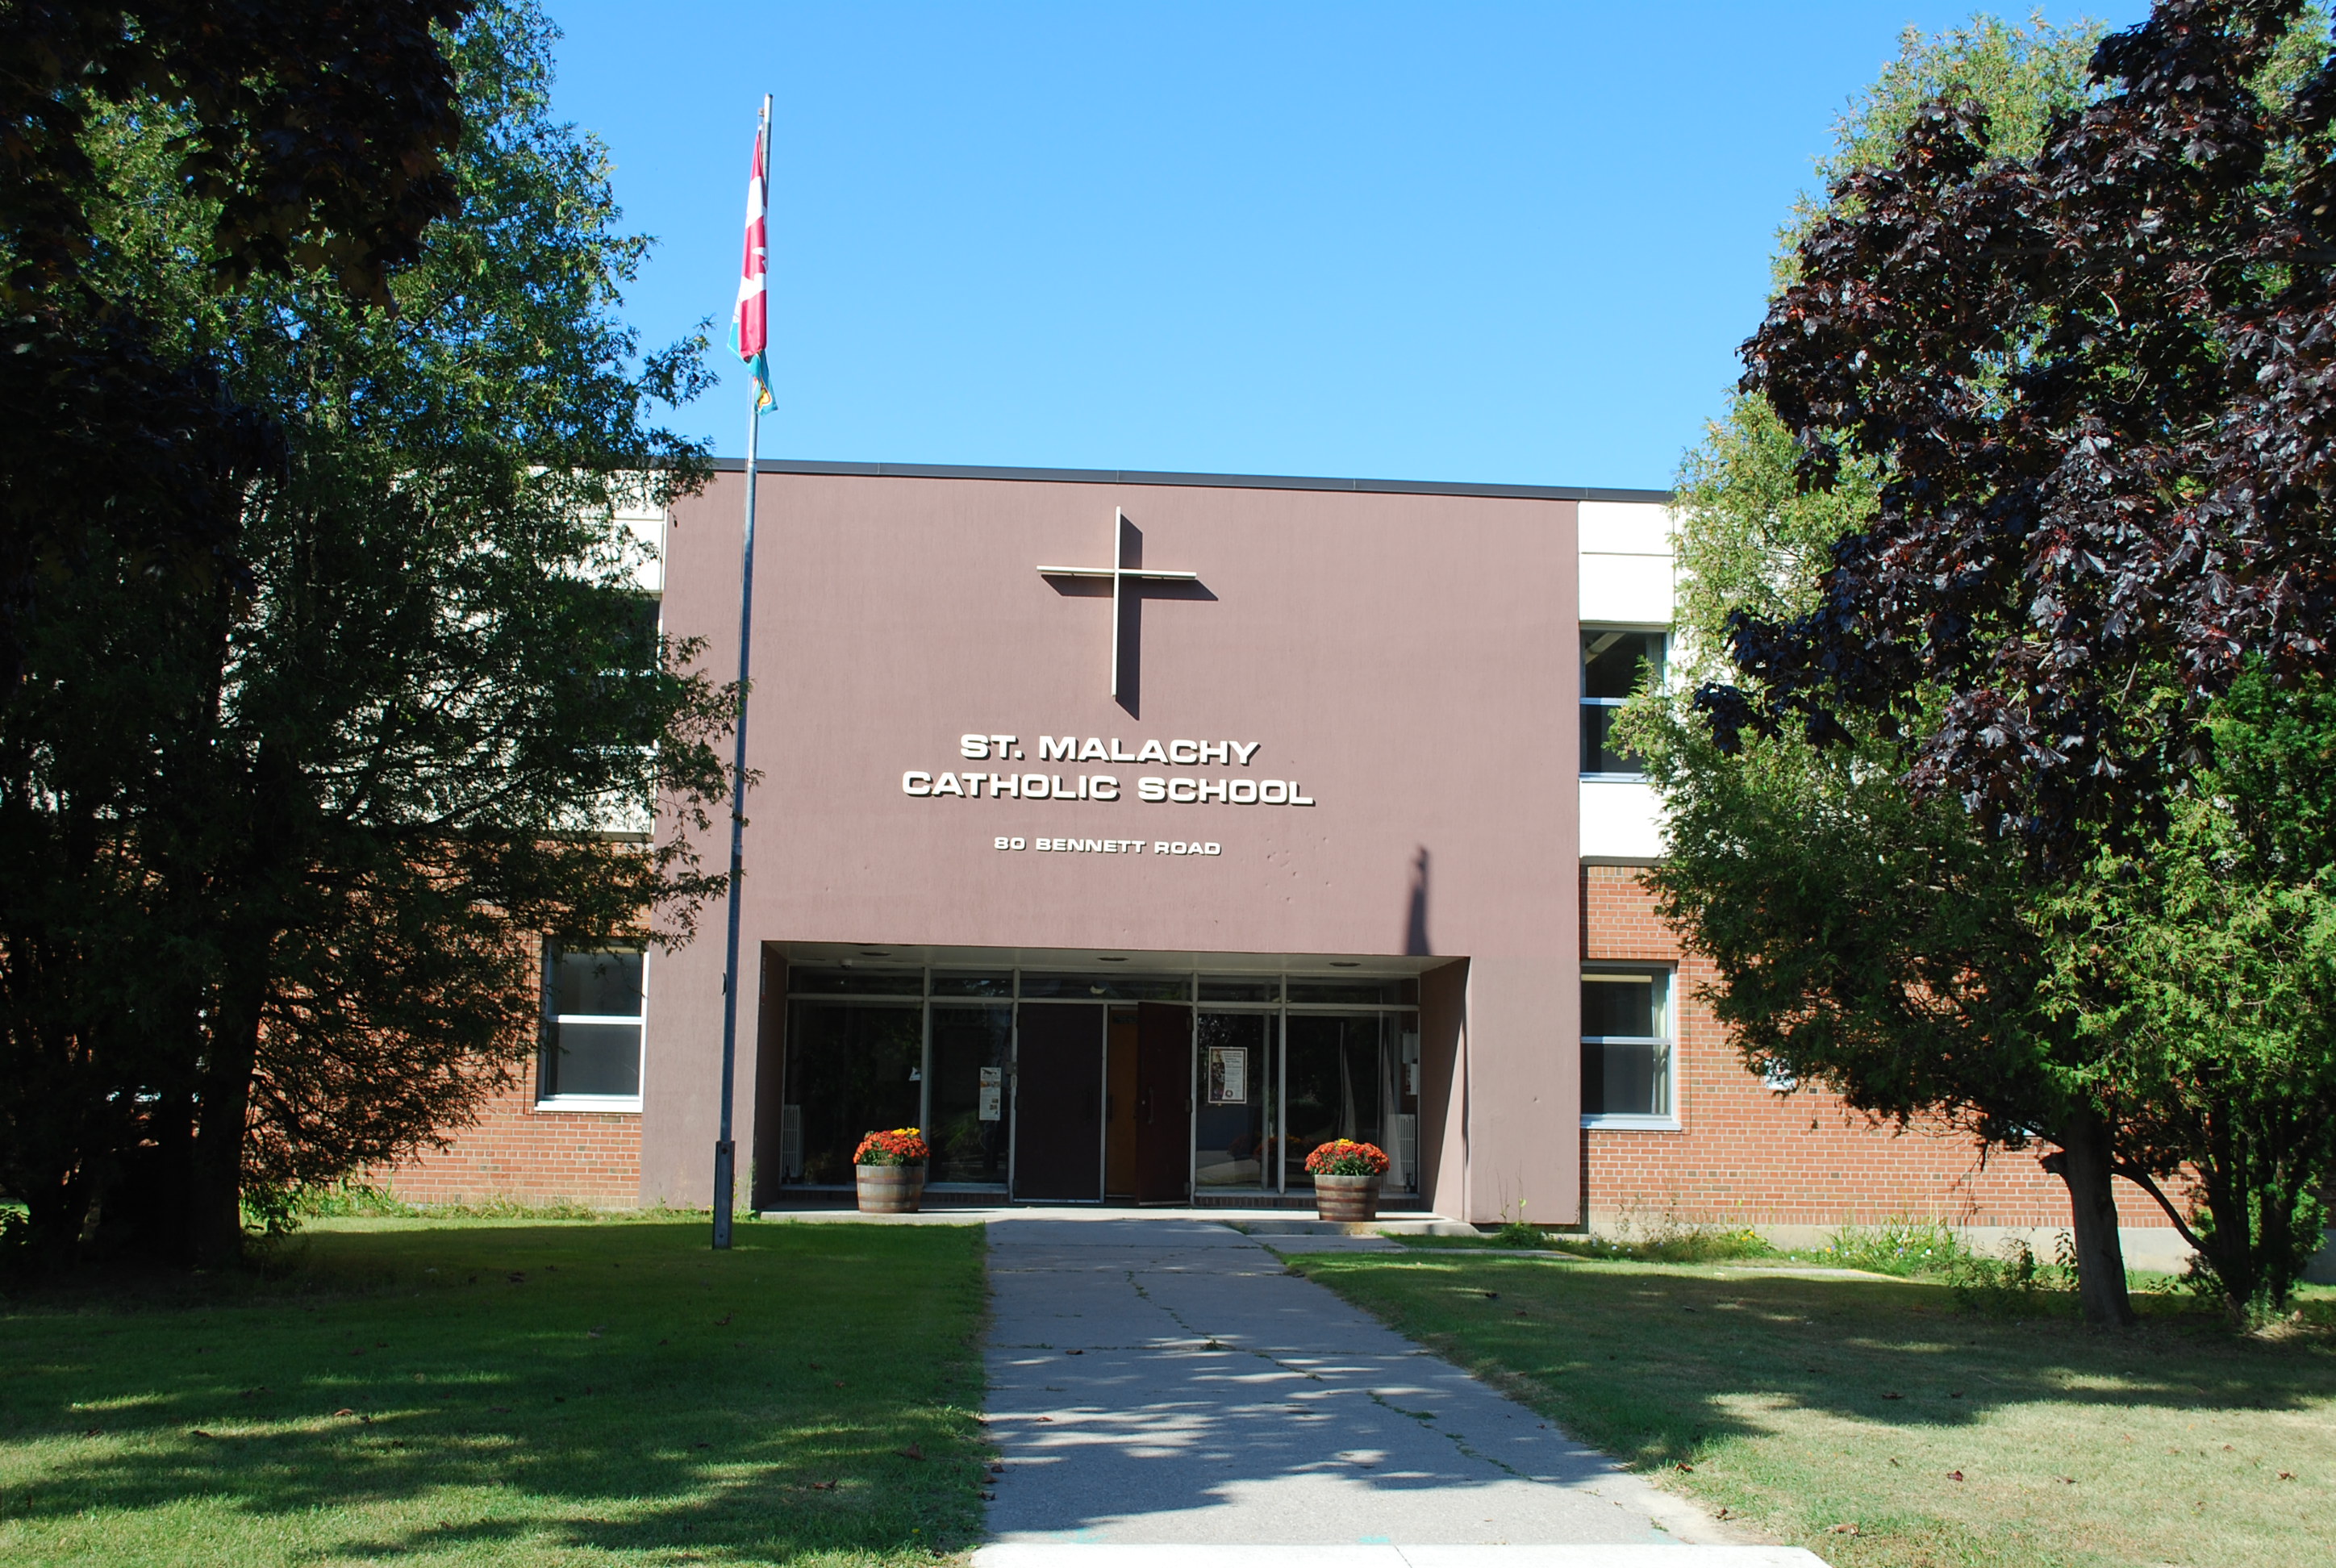 The front of the St. Malachy Catholic School building.